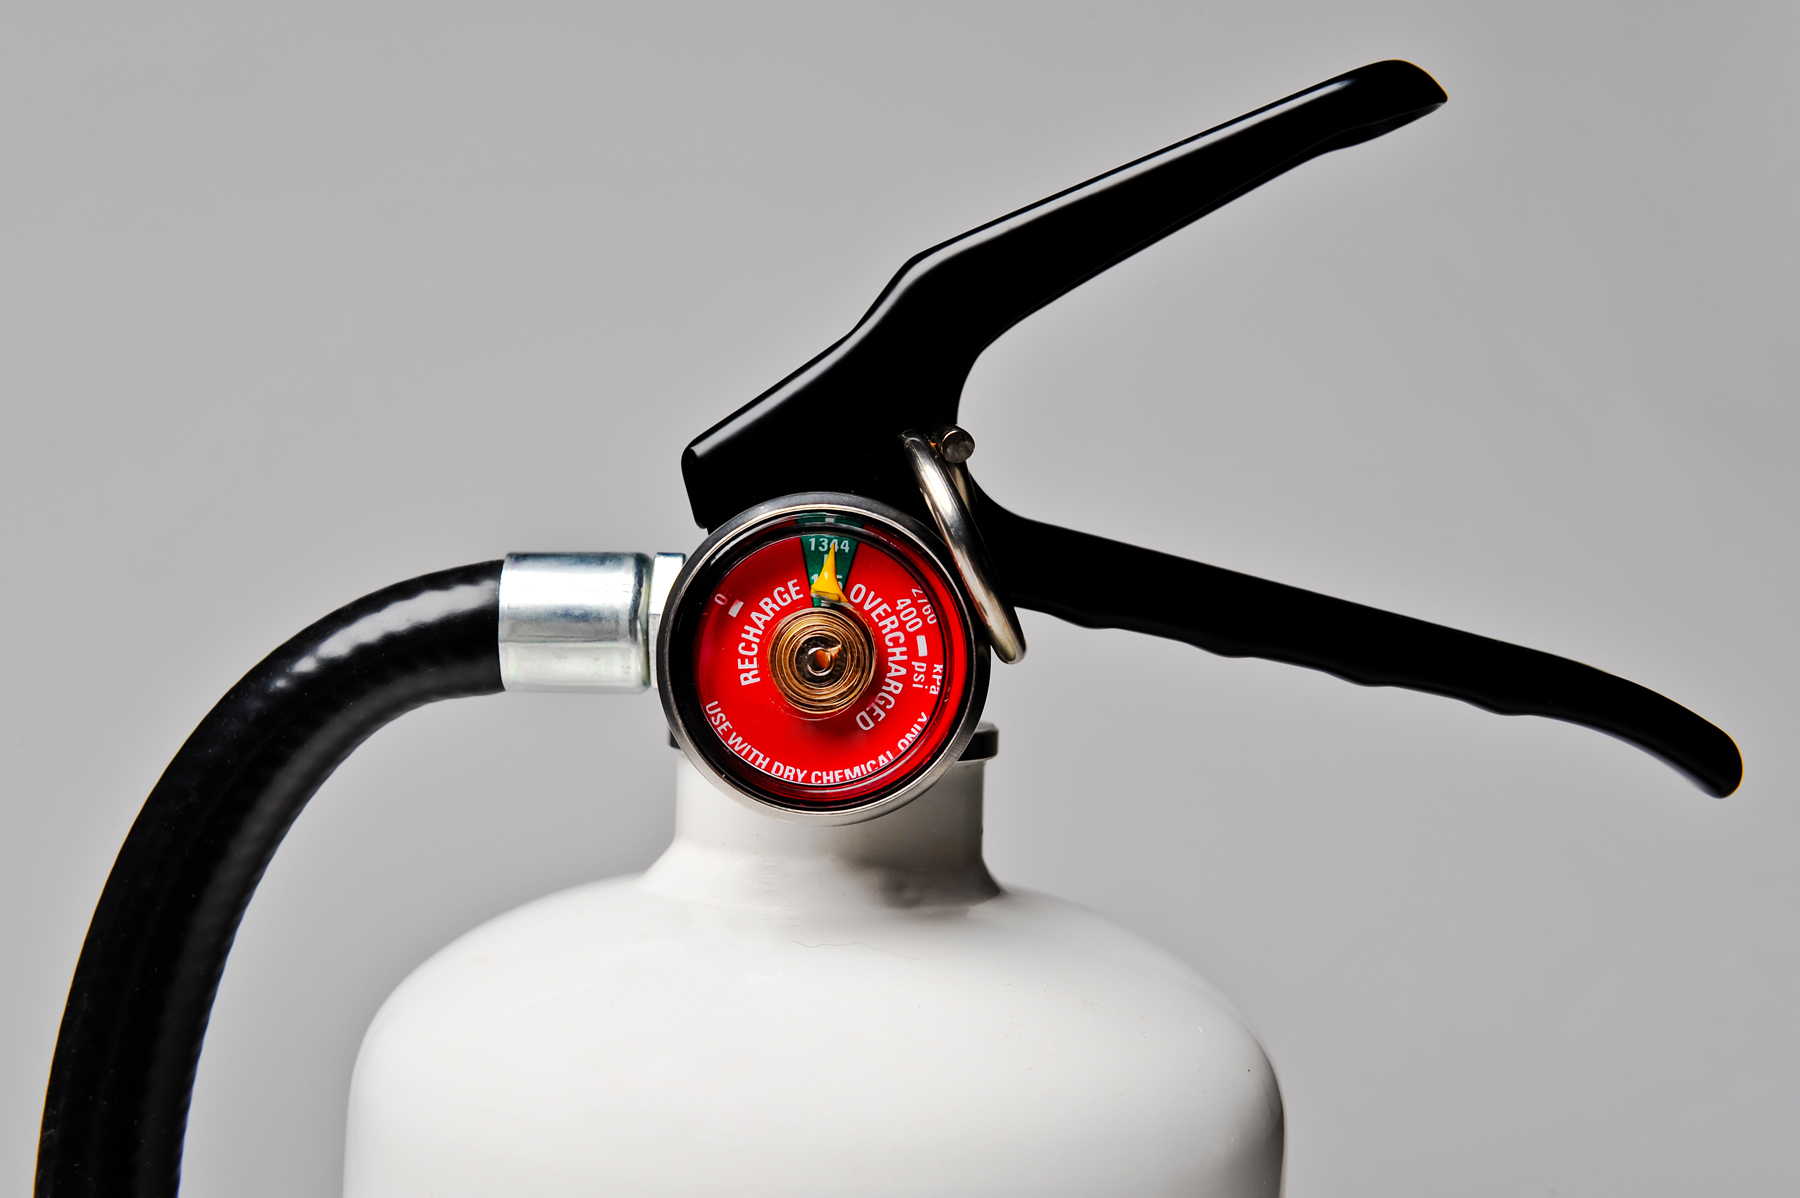 Fire Extinguisher Service, Maintenance, Recharge and Inspections in Gravesend, New York